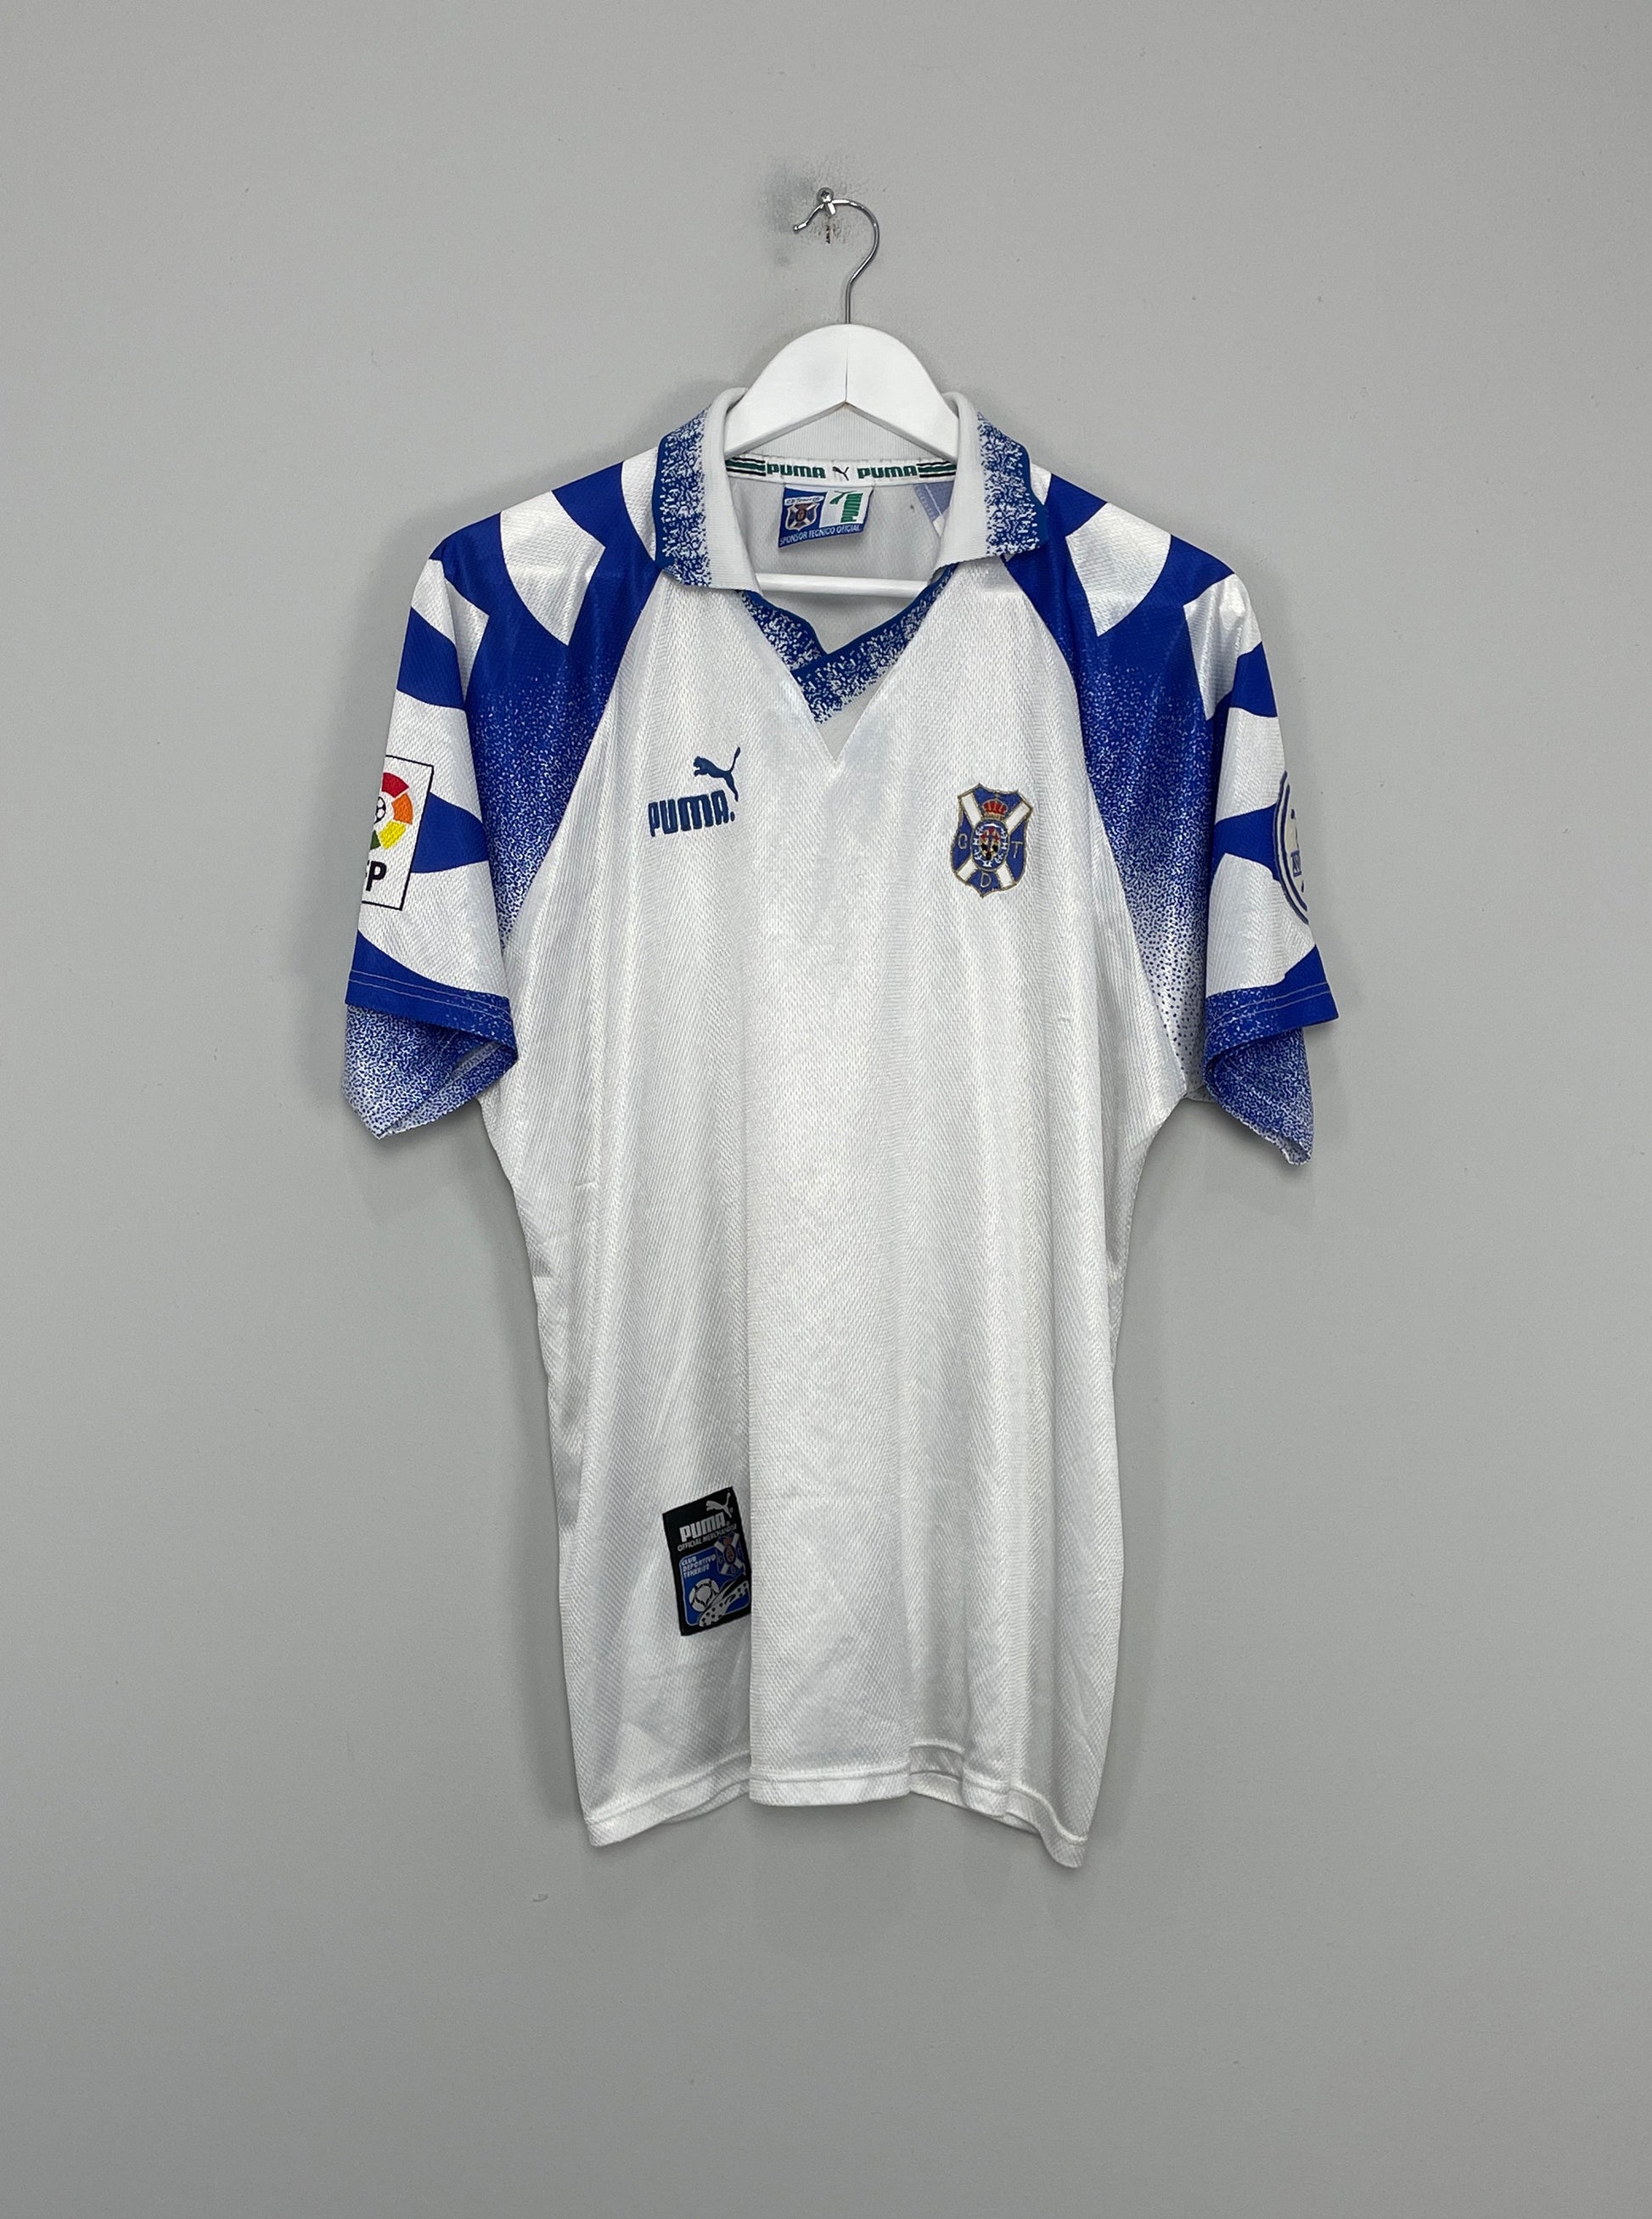 Image of the Tenerife shirt from the 1997/98 season